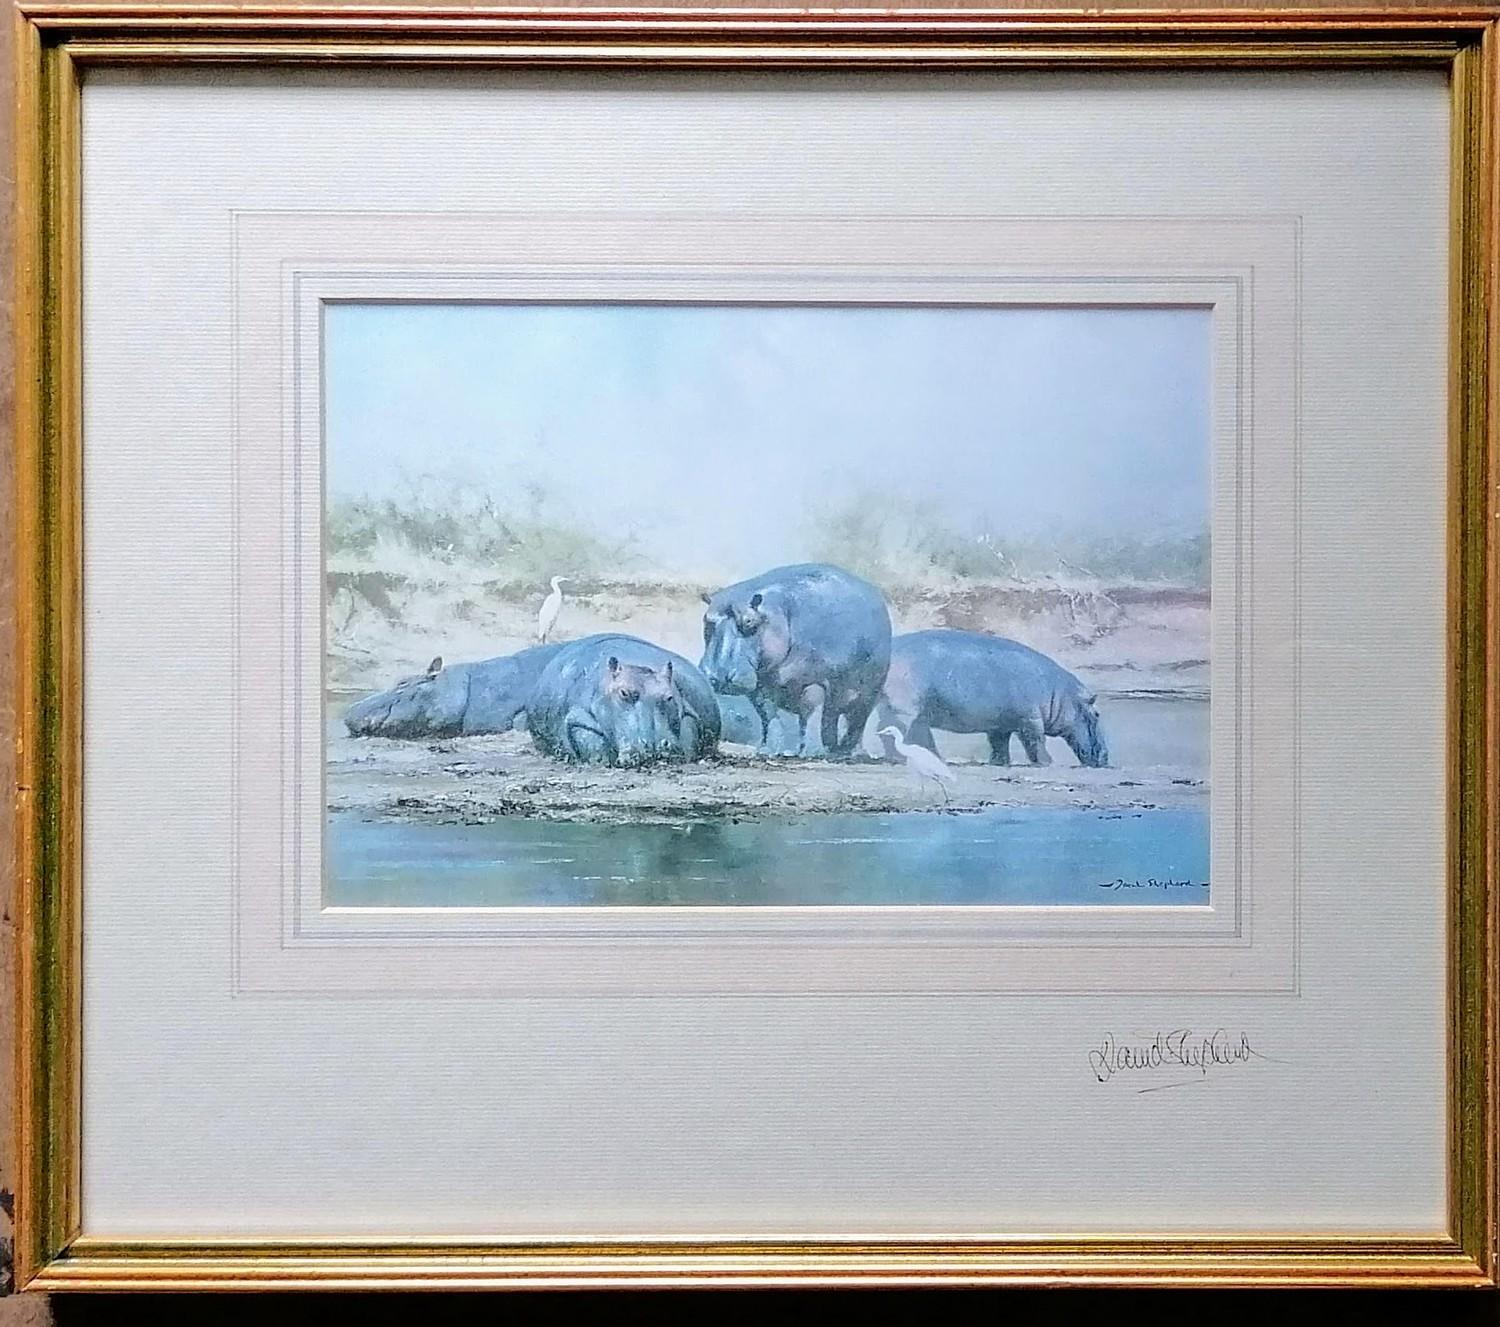 After David Shepherd, HIPPO HEAVEN, print, signed in pencil and dedication verso, framed and - Image 2 of 4